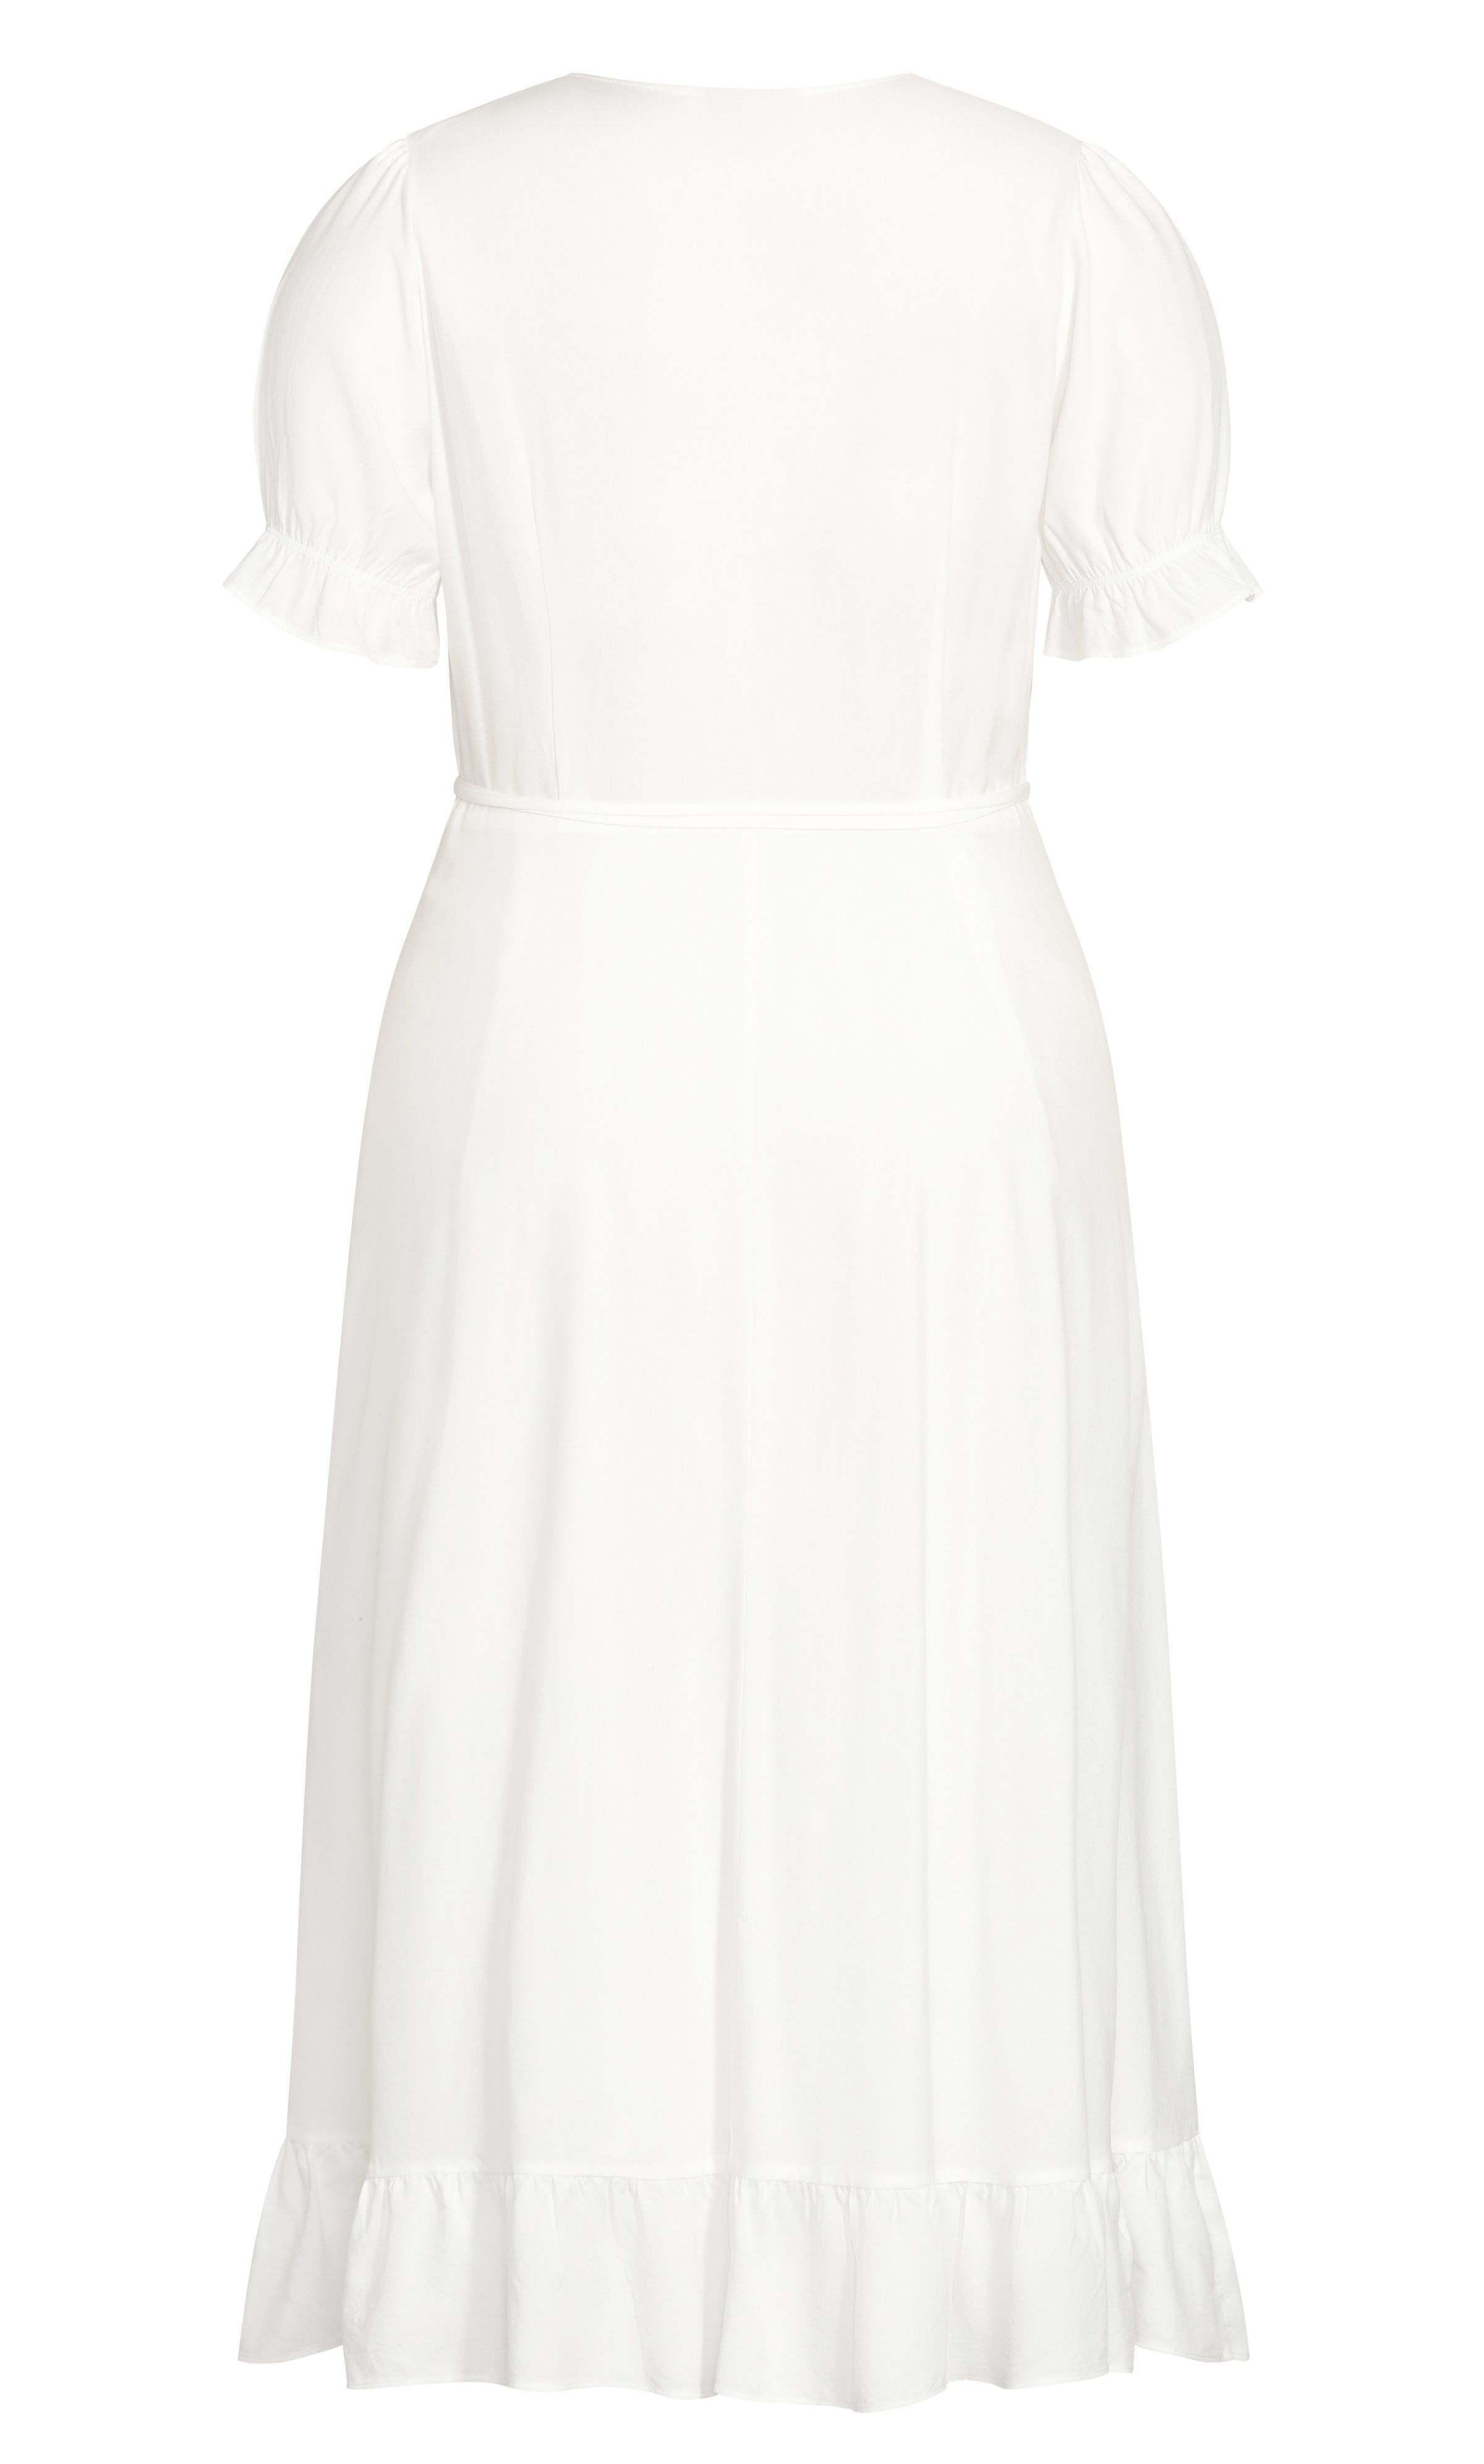 Turn heads all season long in the Ruffle Flirt Maxi Dress. Showcasing a lush wrap silhouette for a form-flattering look, this dress includes short sleeves, a deep V-neckline and a brilliant pristine white hue for an on-trend look. Key Features Include: - V-neckline - True wrap silhouette - Short sleeves with elasticated cuffs - Adjustable self-tie fabric to waist - Maxi-length hemline with frilled kick - Lined - Made from a soft and smooth natural cellulosic fibre Bring some glamour to your look with a strappy pair of espadrille heels and gold accessories for a sophisticated edge.